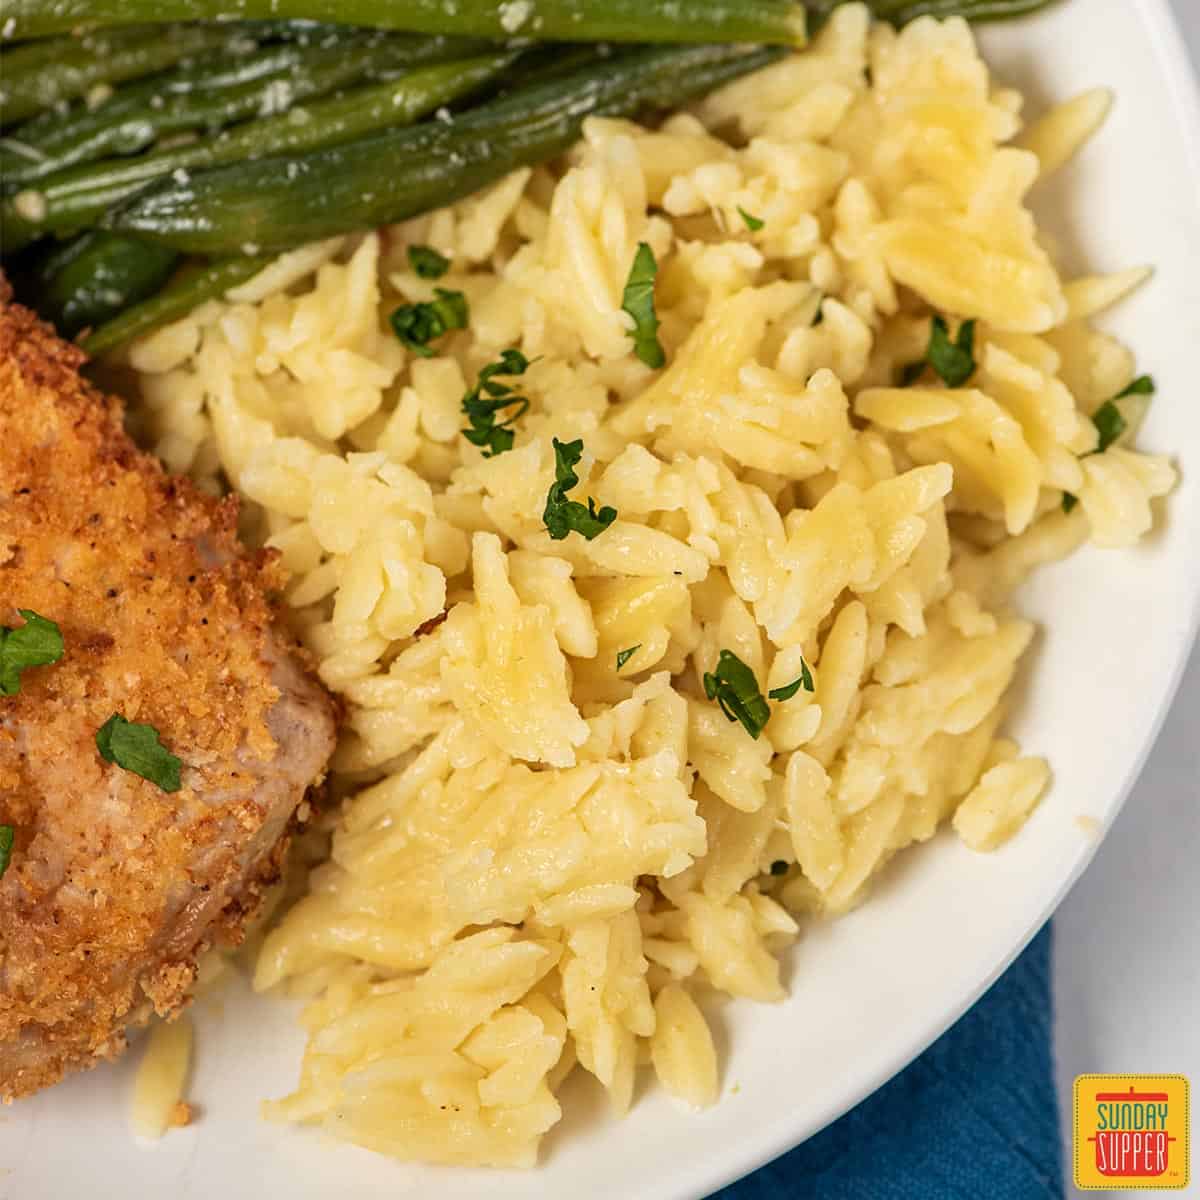 Cheesy orzo risotto on a plate with green beans and air fryer pork chops